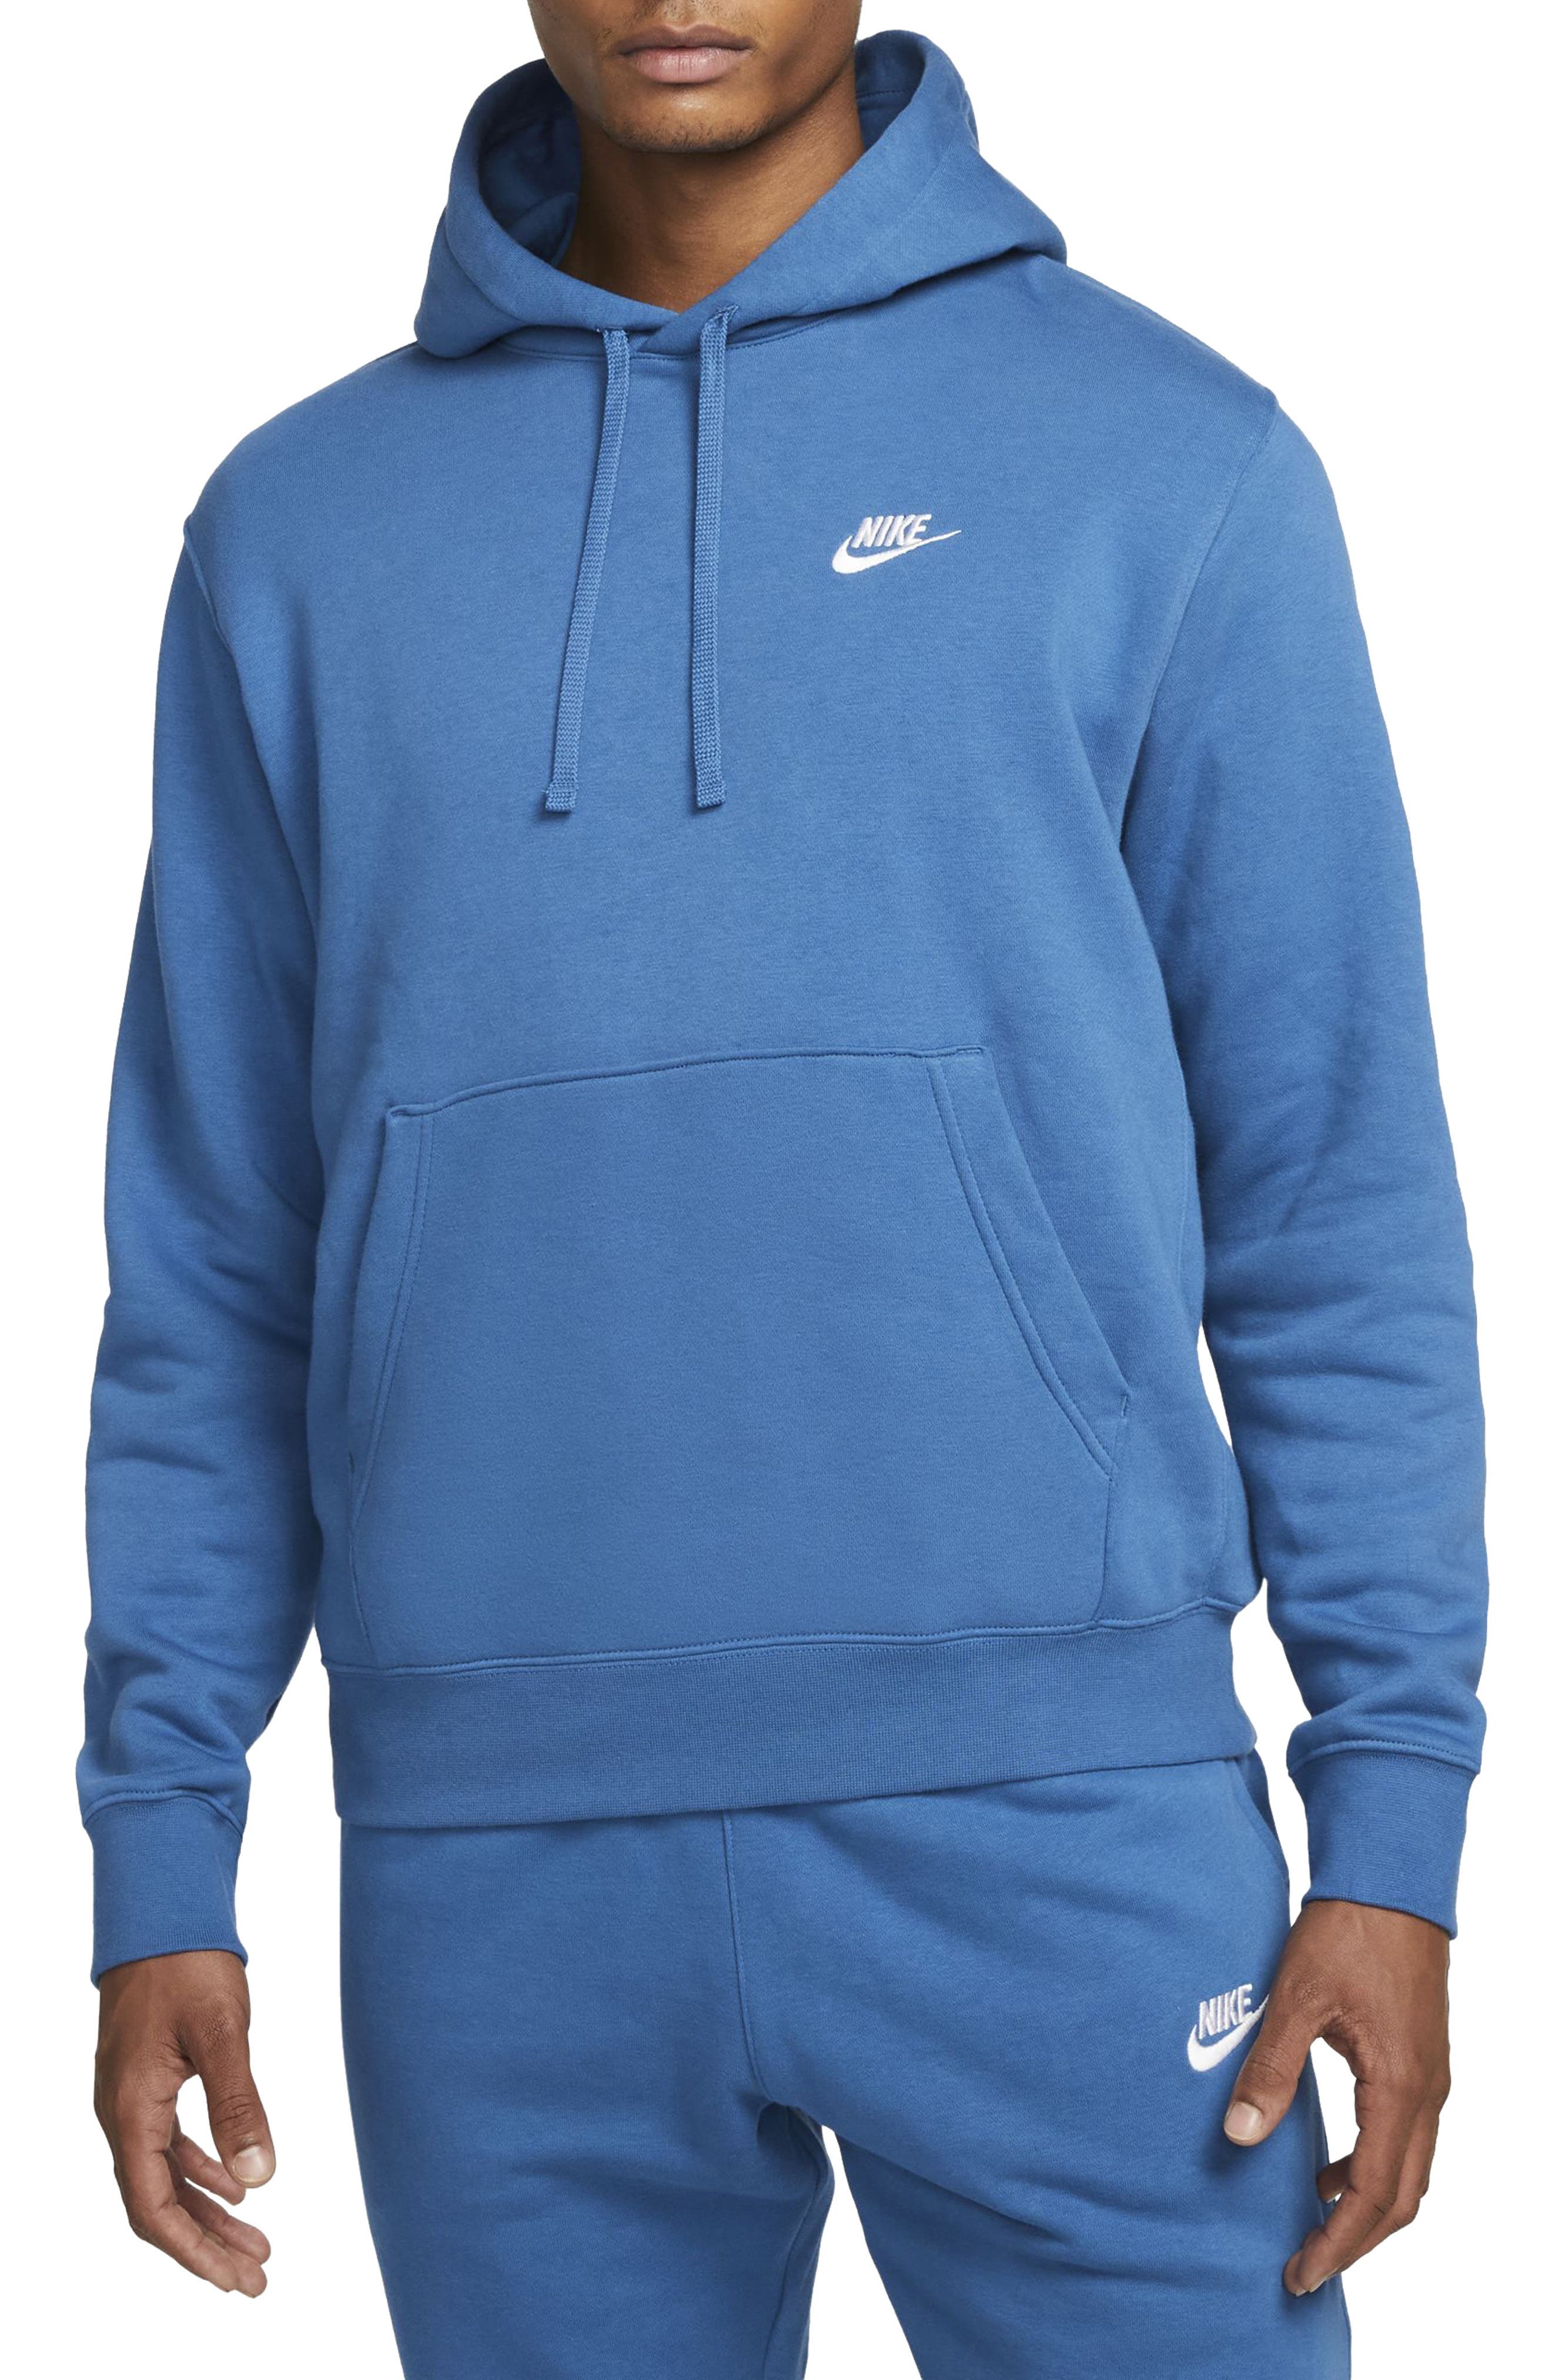 Champion Fleece Sweatshirt in Sky Blue Blue for Men gym and workout clothes Sweatshirts Mens Clothing Activewear 